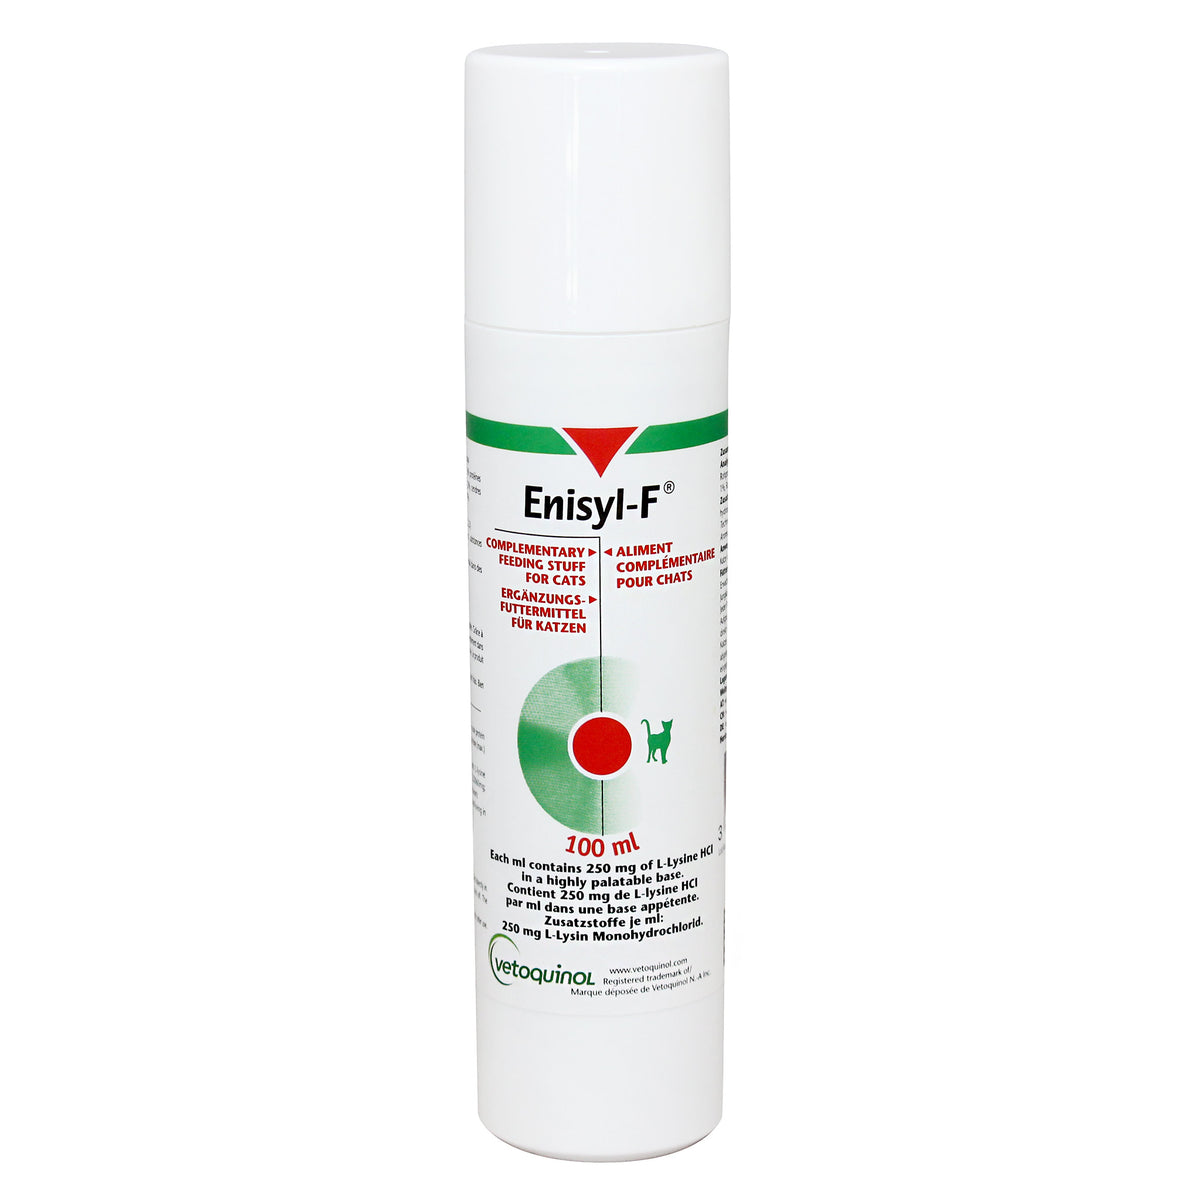 Enisyl-F Oral Paste for Cats 100ml